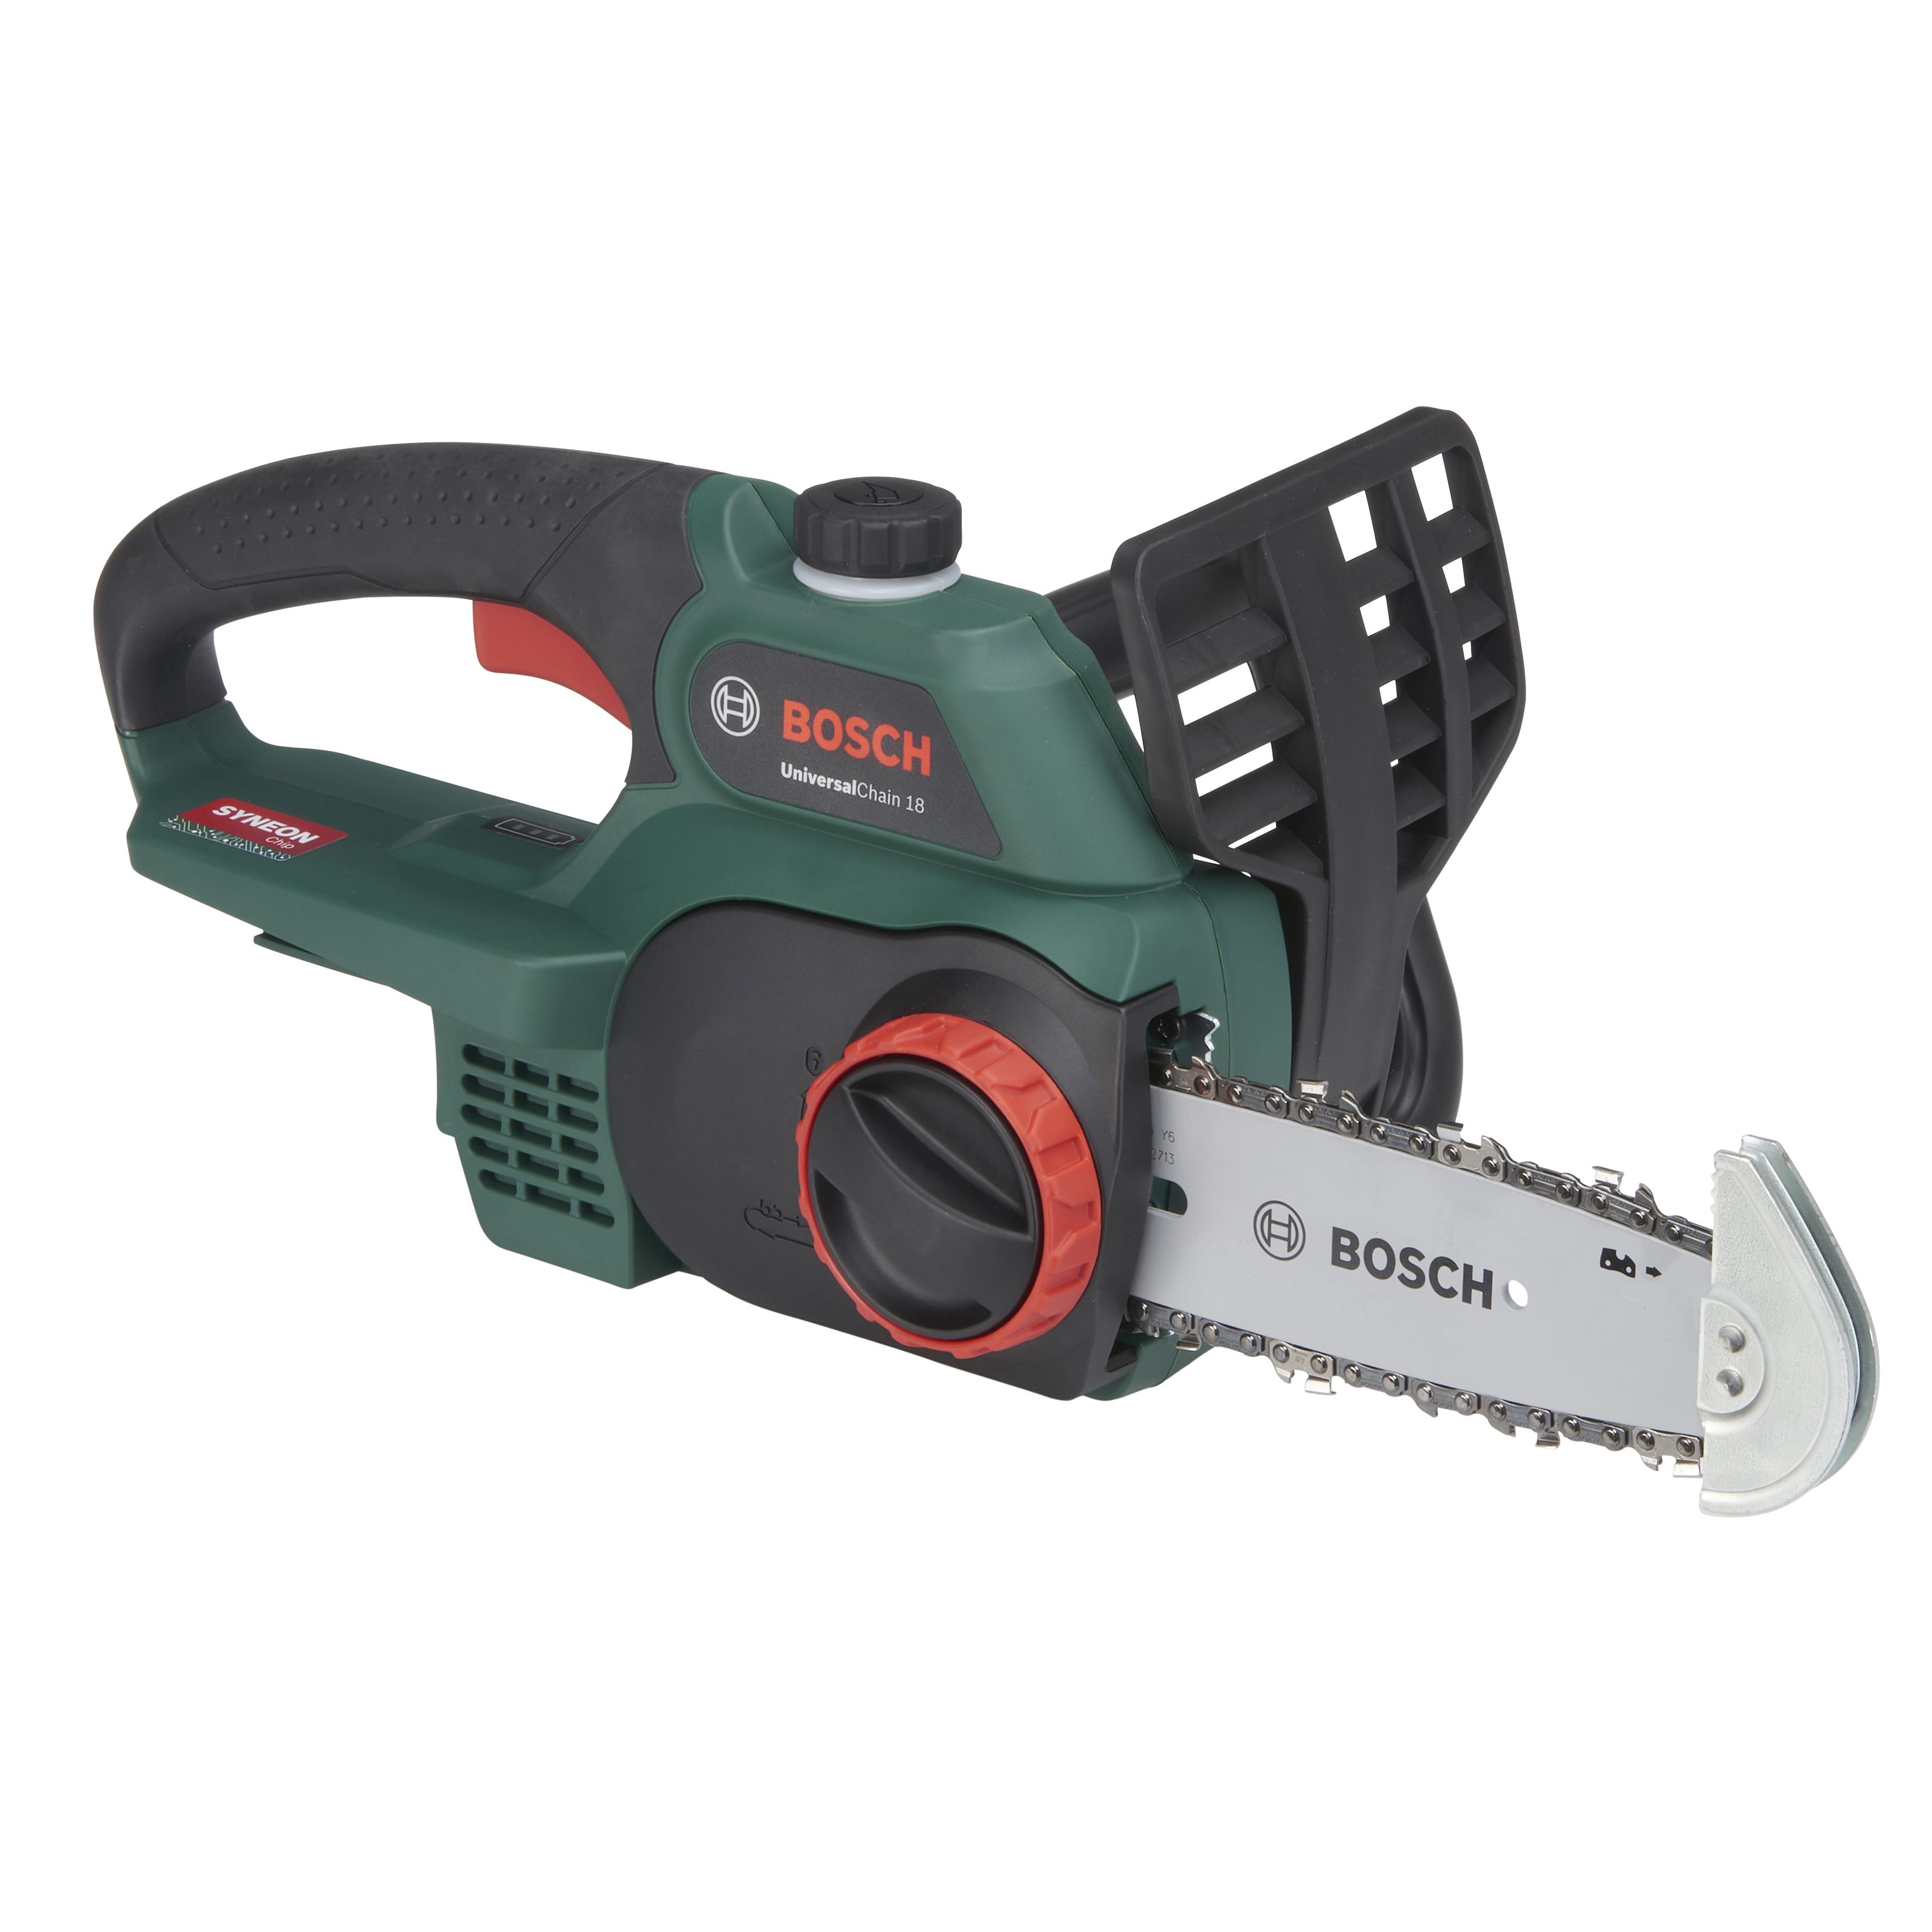  Bosch  Cordless Electric Chainsaw  Departments DIY at B Q